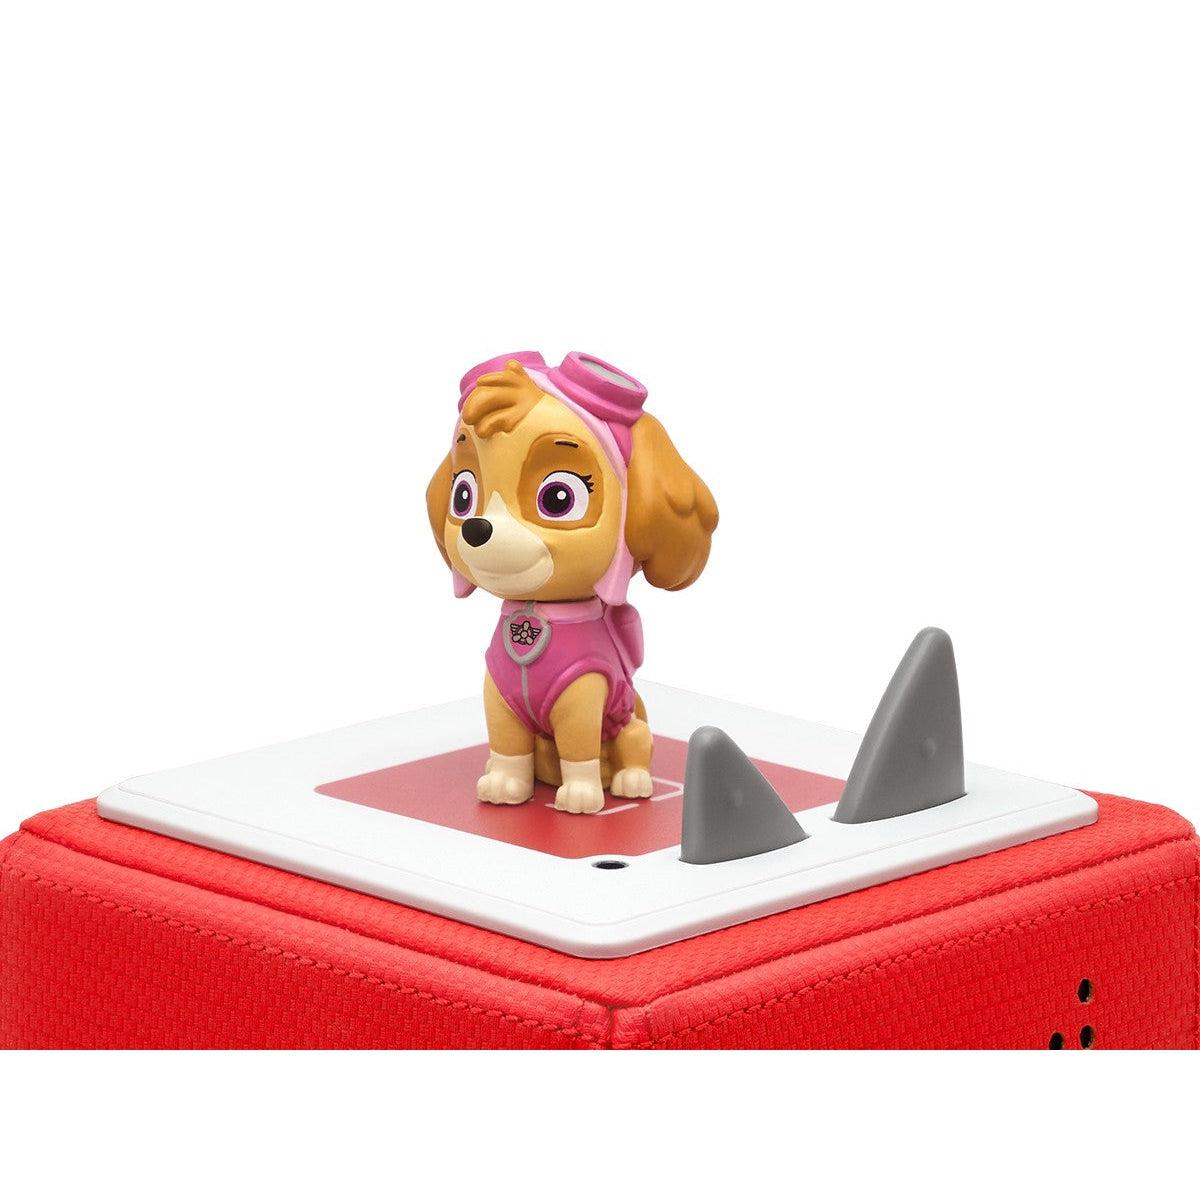 Tonies Paw Patrol - Skye - Audio Character for use with Toniebox Player